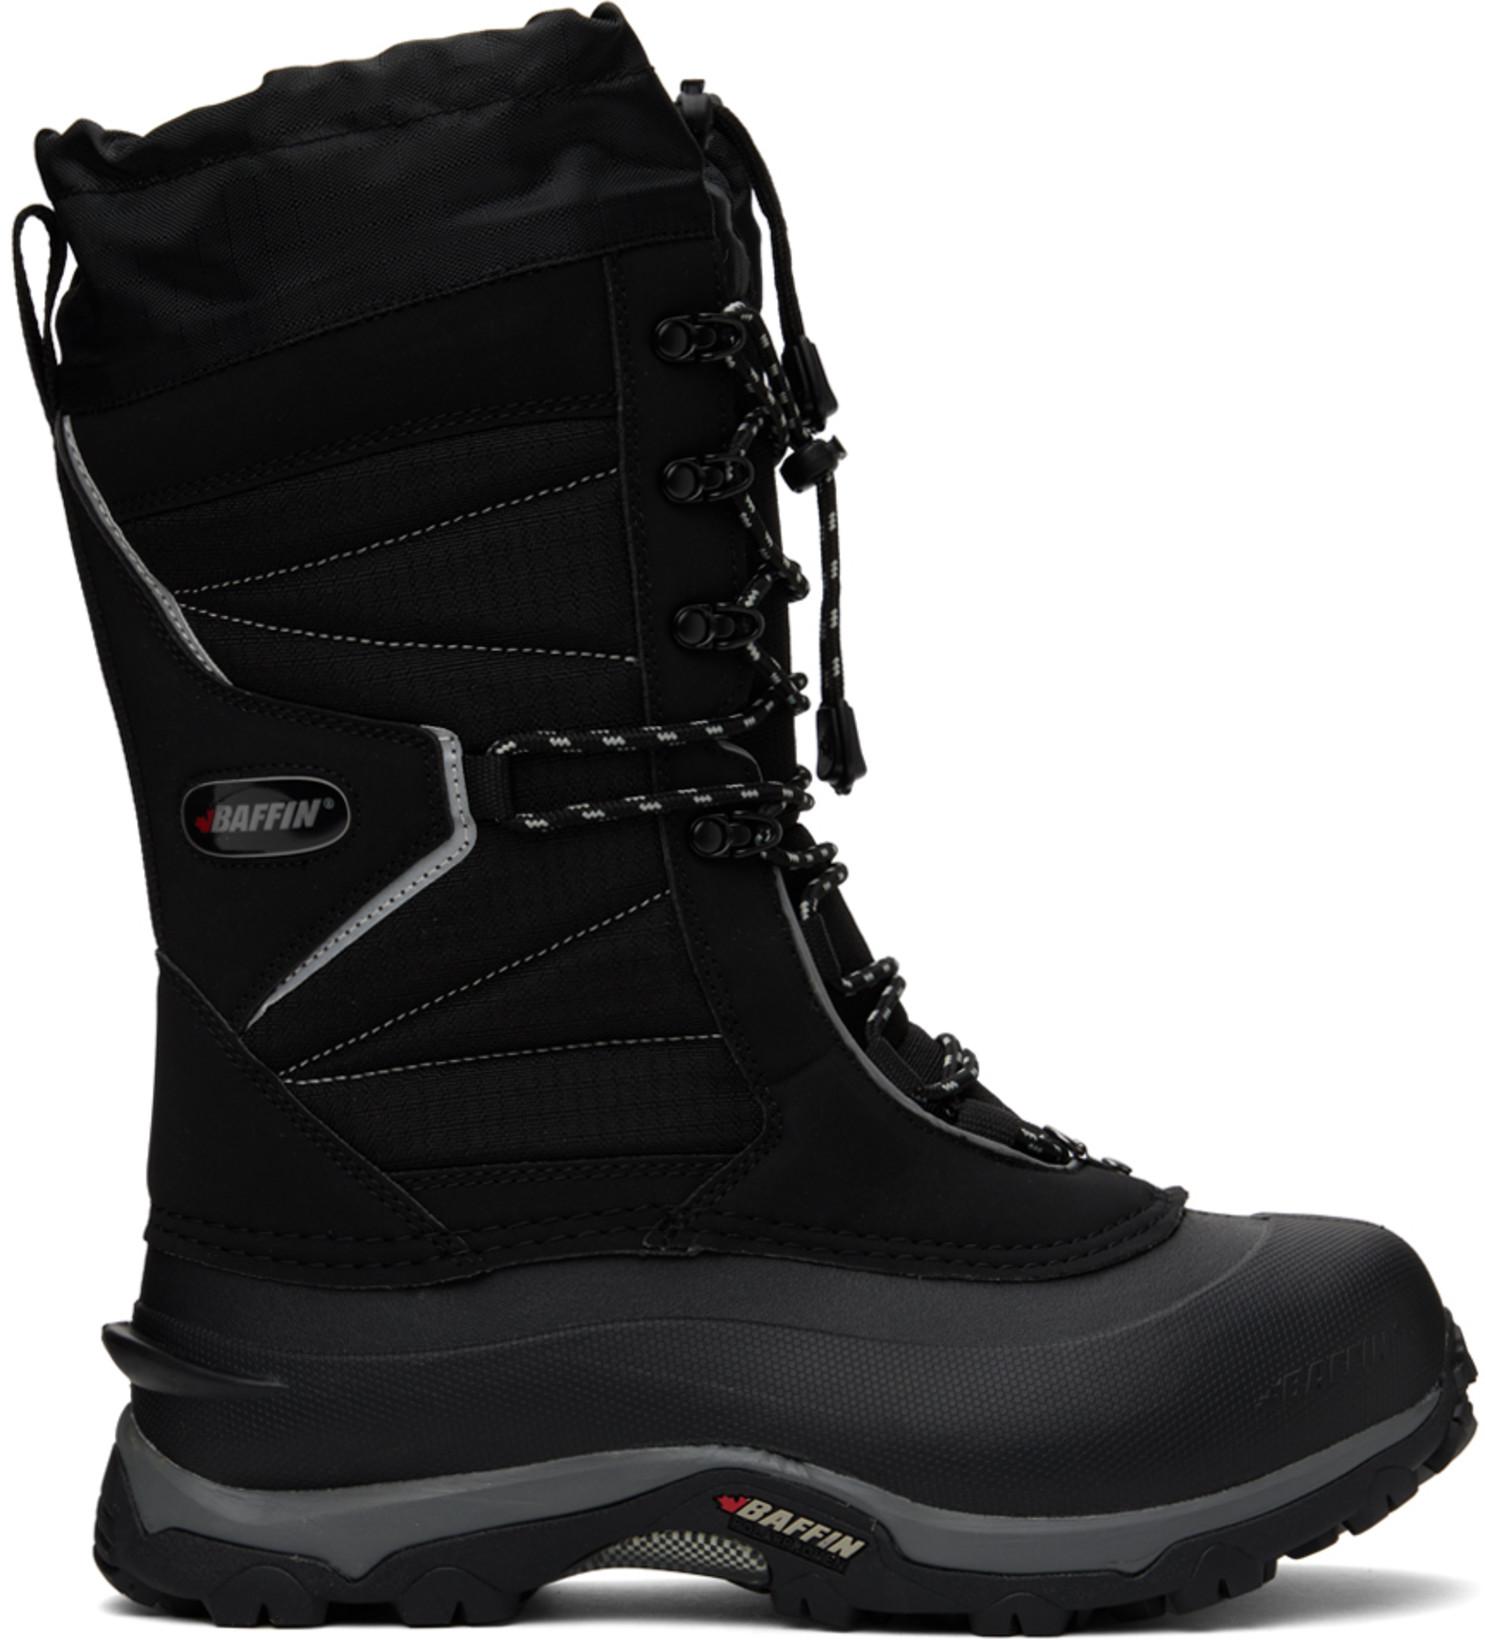 Black Sequoia Boots by BAFFIN